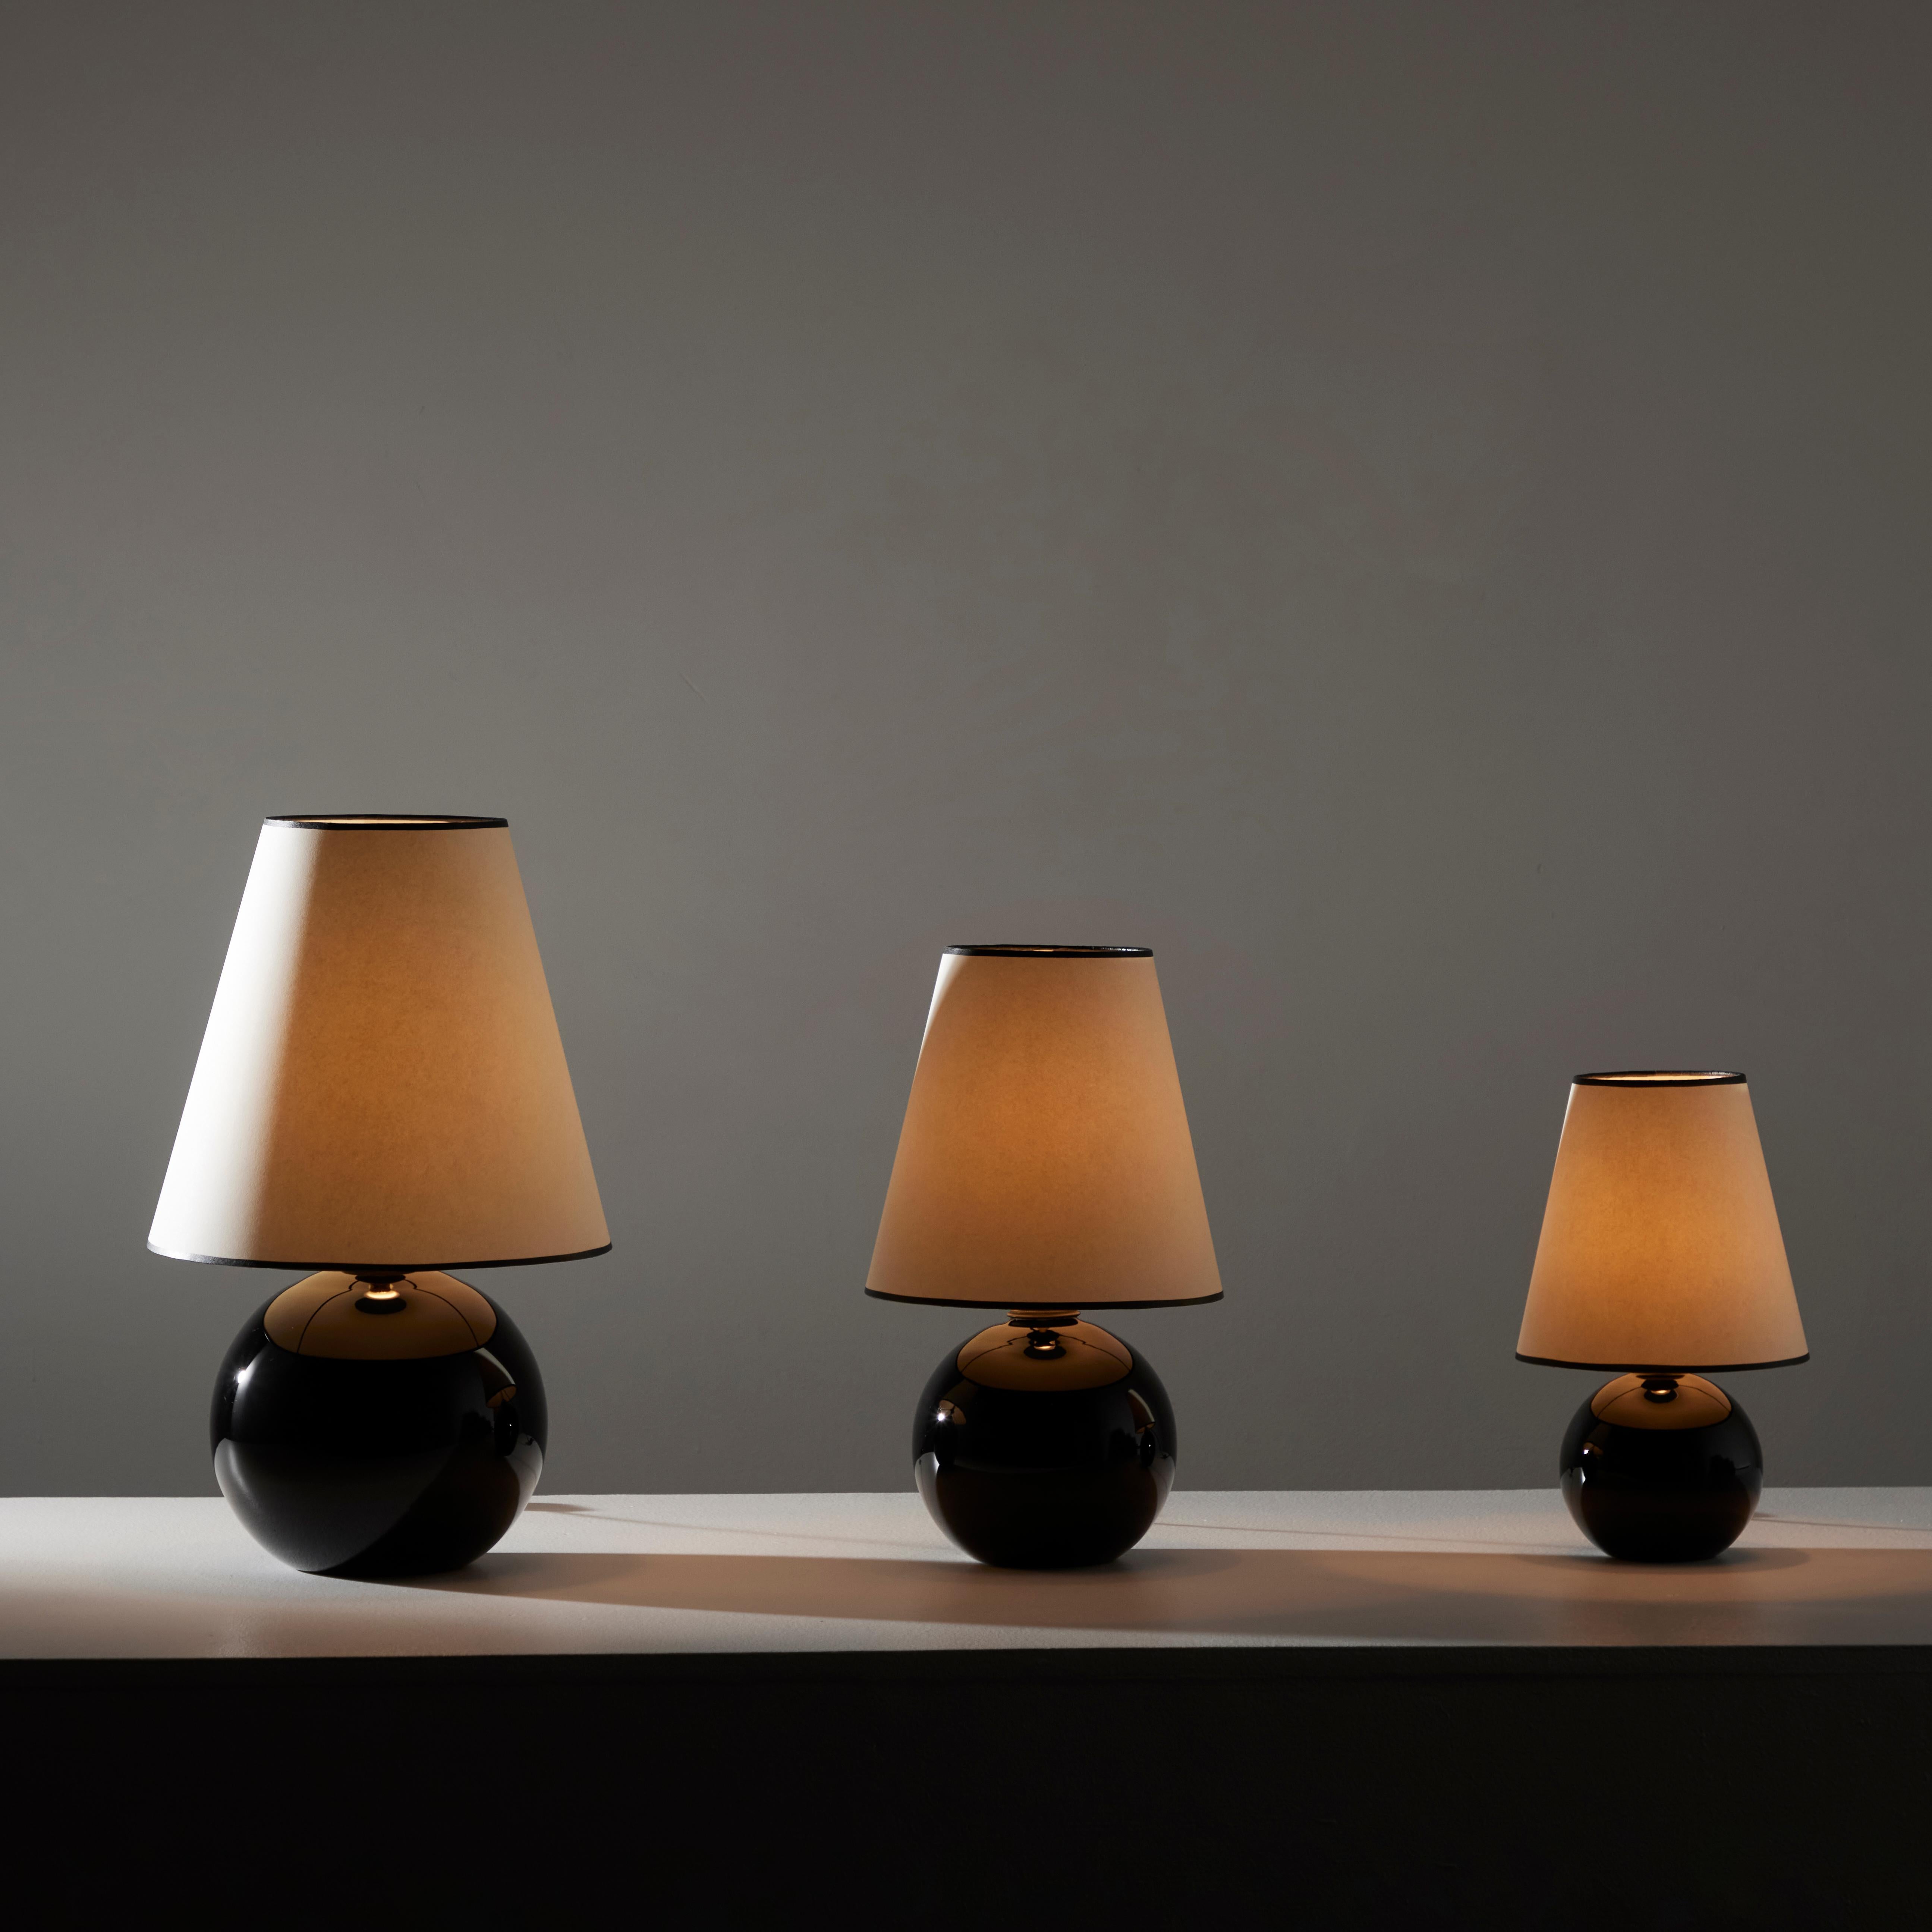 Set of Black Opaline Table Lamps by Jacques Adnet. Designed and manufactured in France, circa 1940s. Black opaline spherical base with a newly fabricated linen shade. Each lamp holds one European B22 bayonet socket, adapted for the US. In line